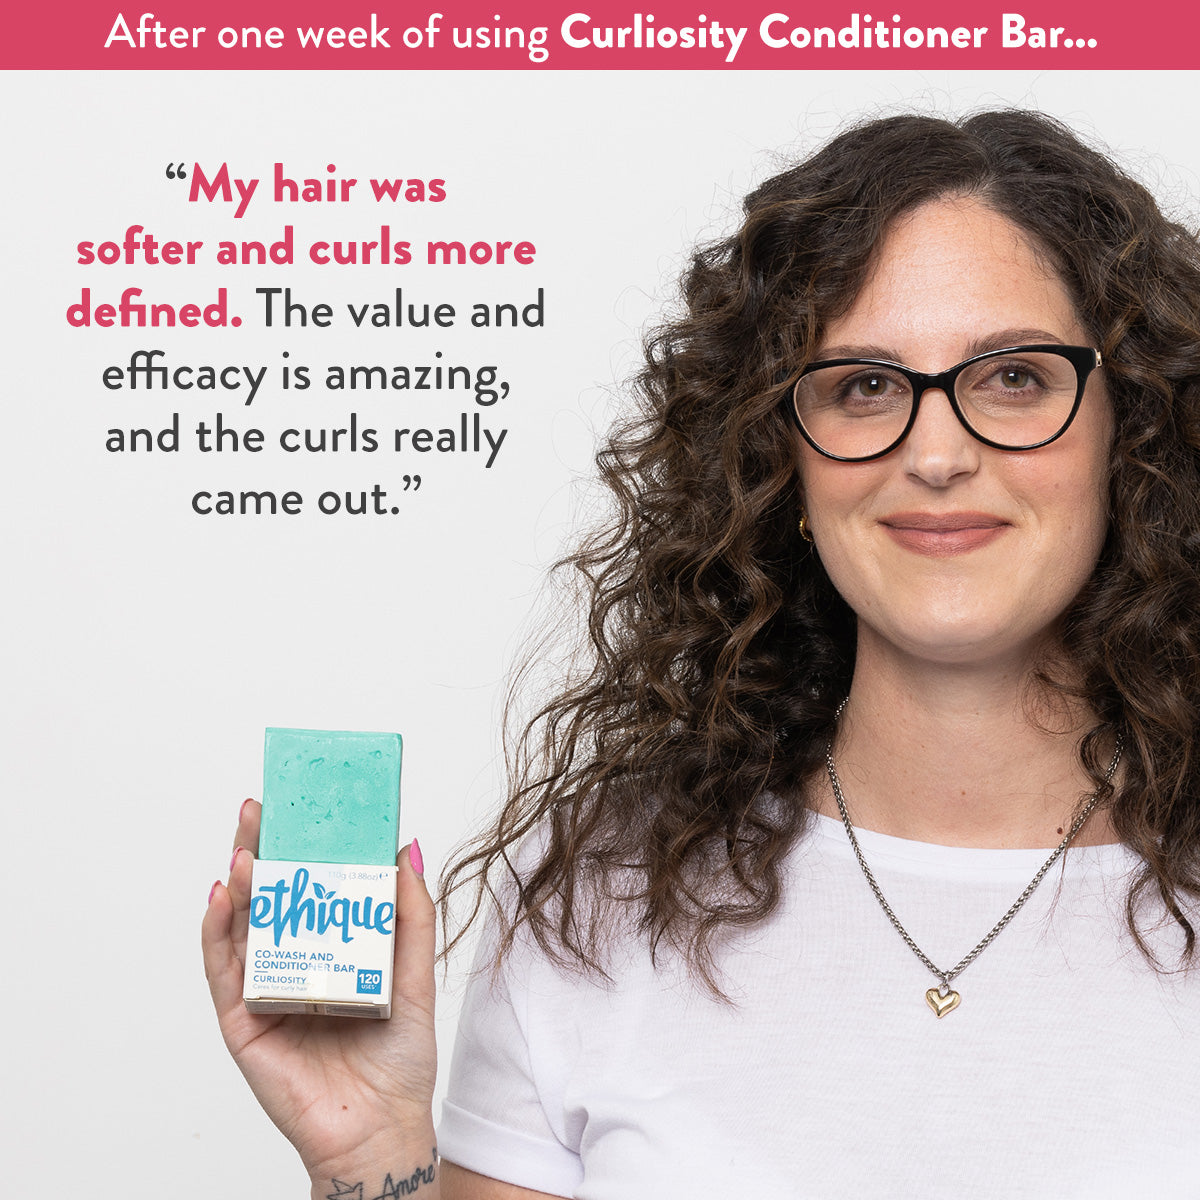 Moisturizing Conditioner Bar for Curly and Coily Hair: Curliosity™